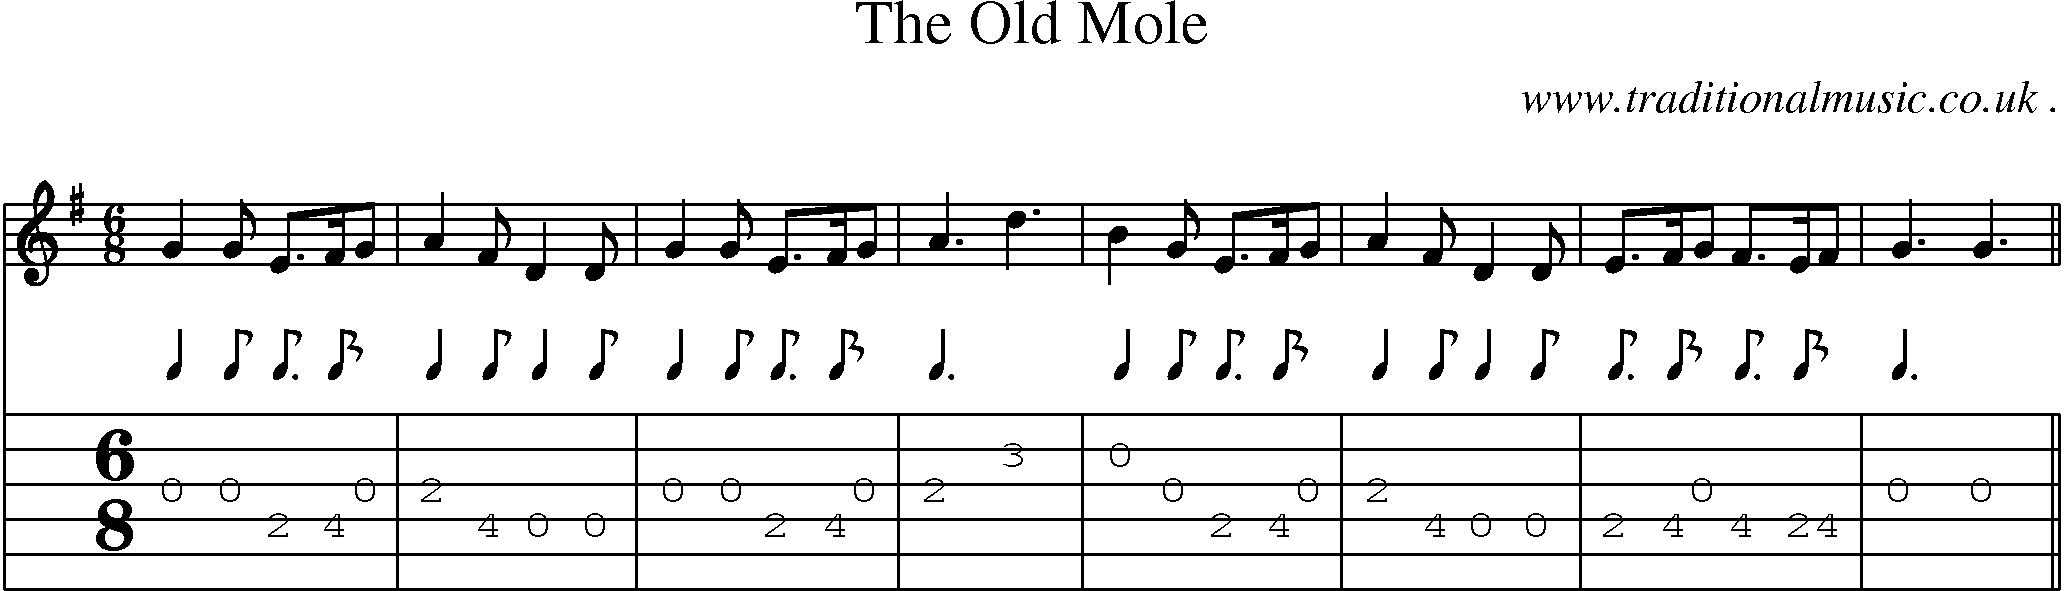 Sheet-Music and Guitar Tabs for The Old Mole